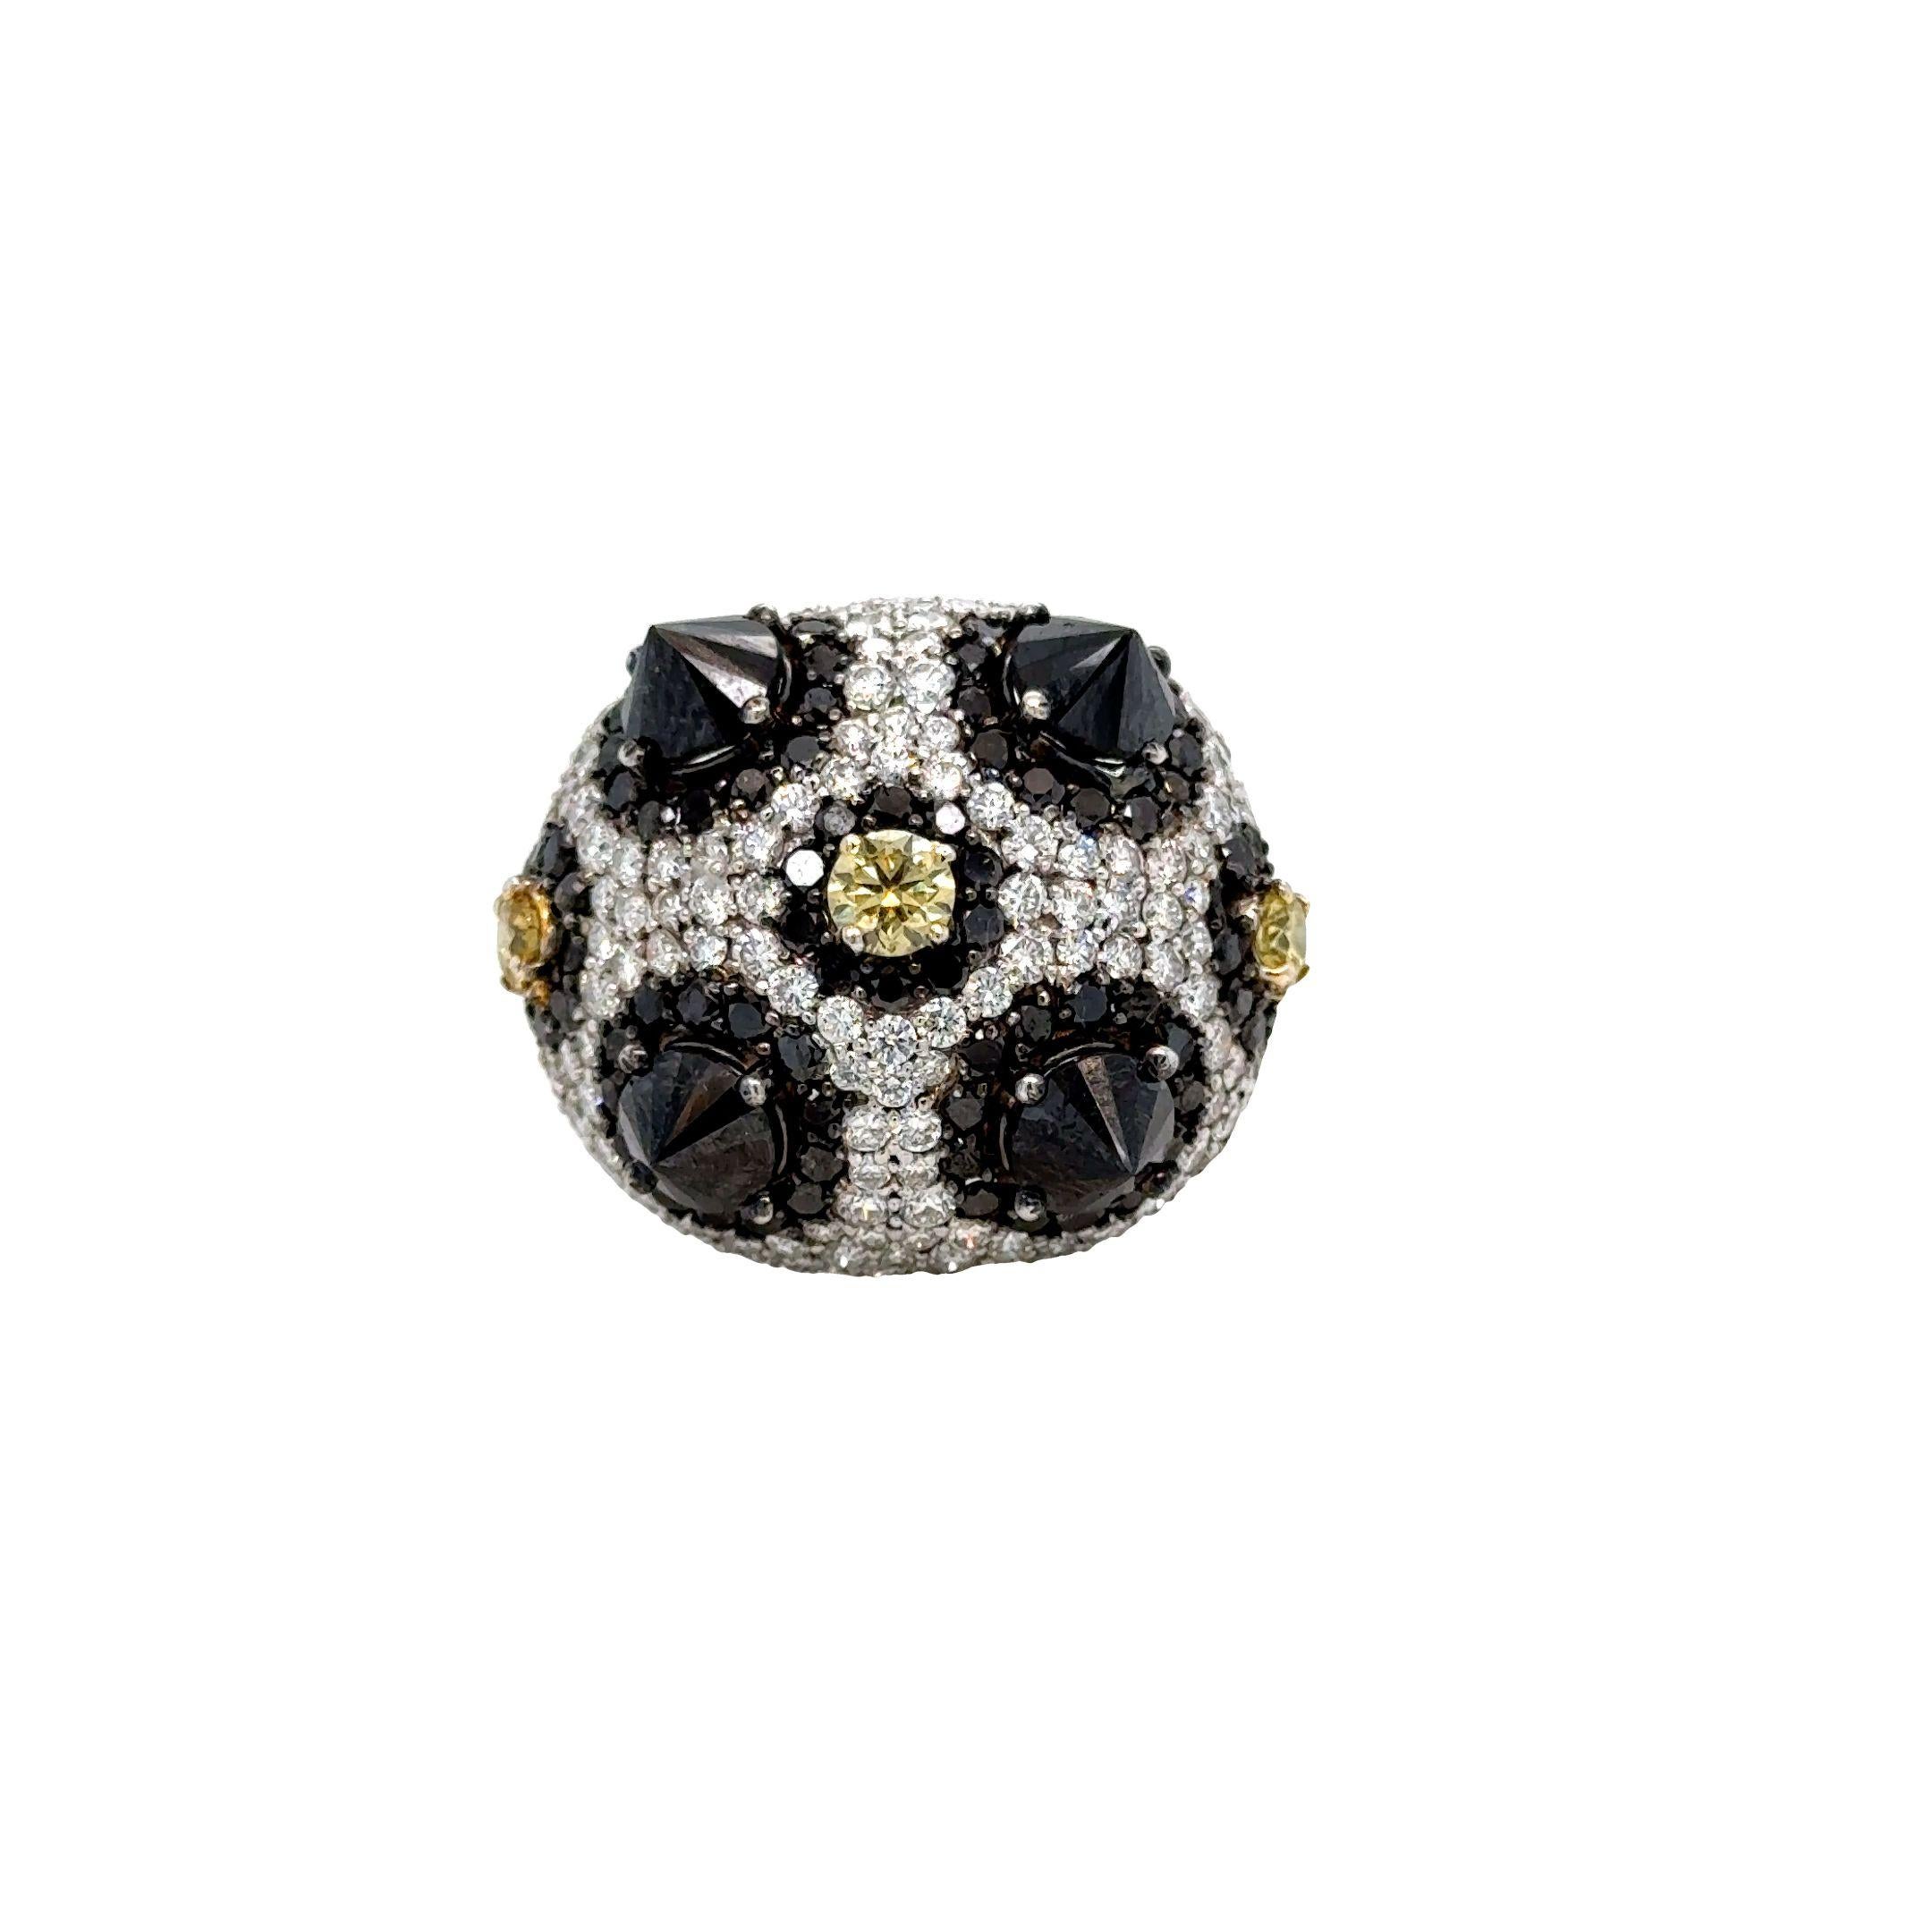 Worn by actress and producer Sharon Stone to Steven Tyler's 2019 Grammy's viewing party. 

18K White Gold
Black Diamond: 5.94ct total weight.
Fancy Yellow Diamond: 0.68ct total weight.
Diamonds: 5.09ct total weight.
All diamonds are G-H/SI stones.
